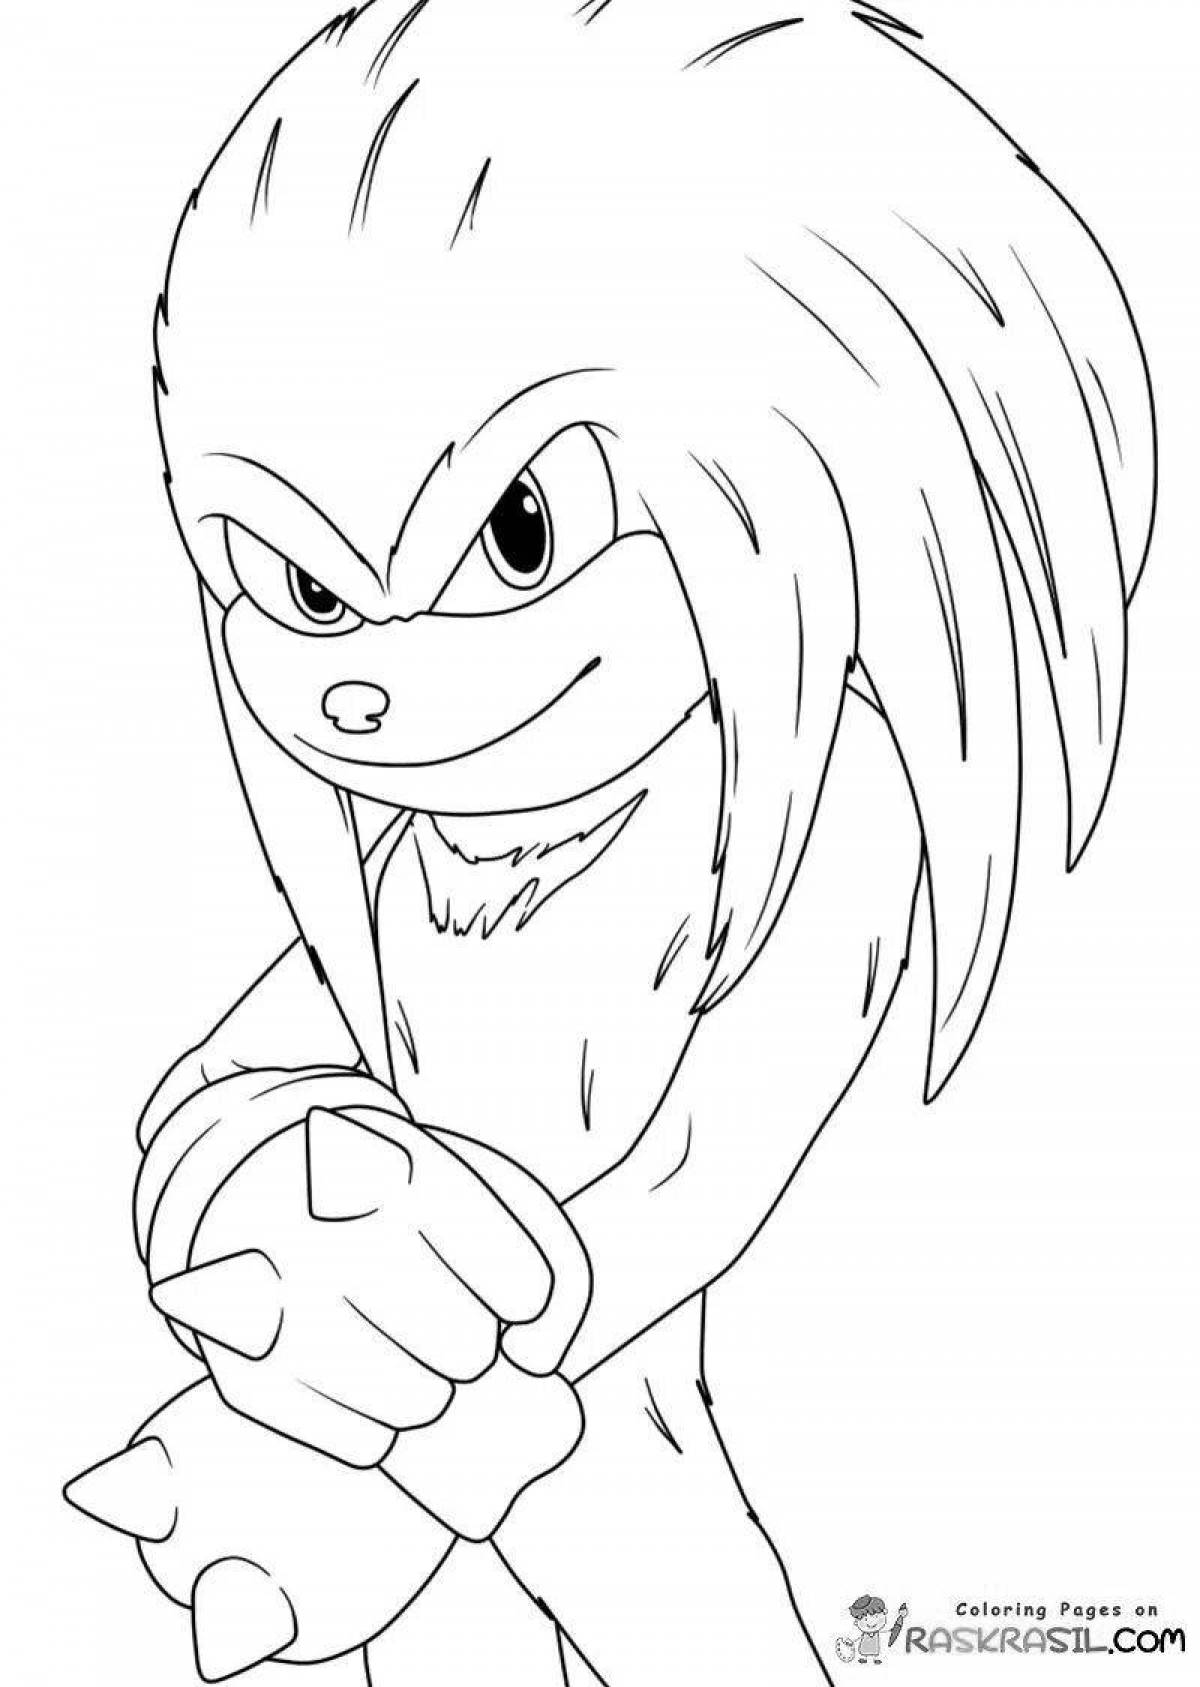 Knuckles #1